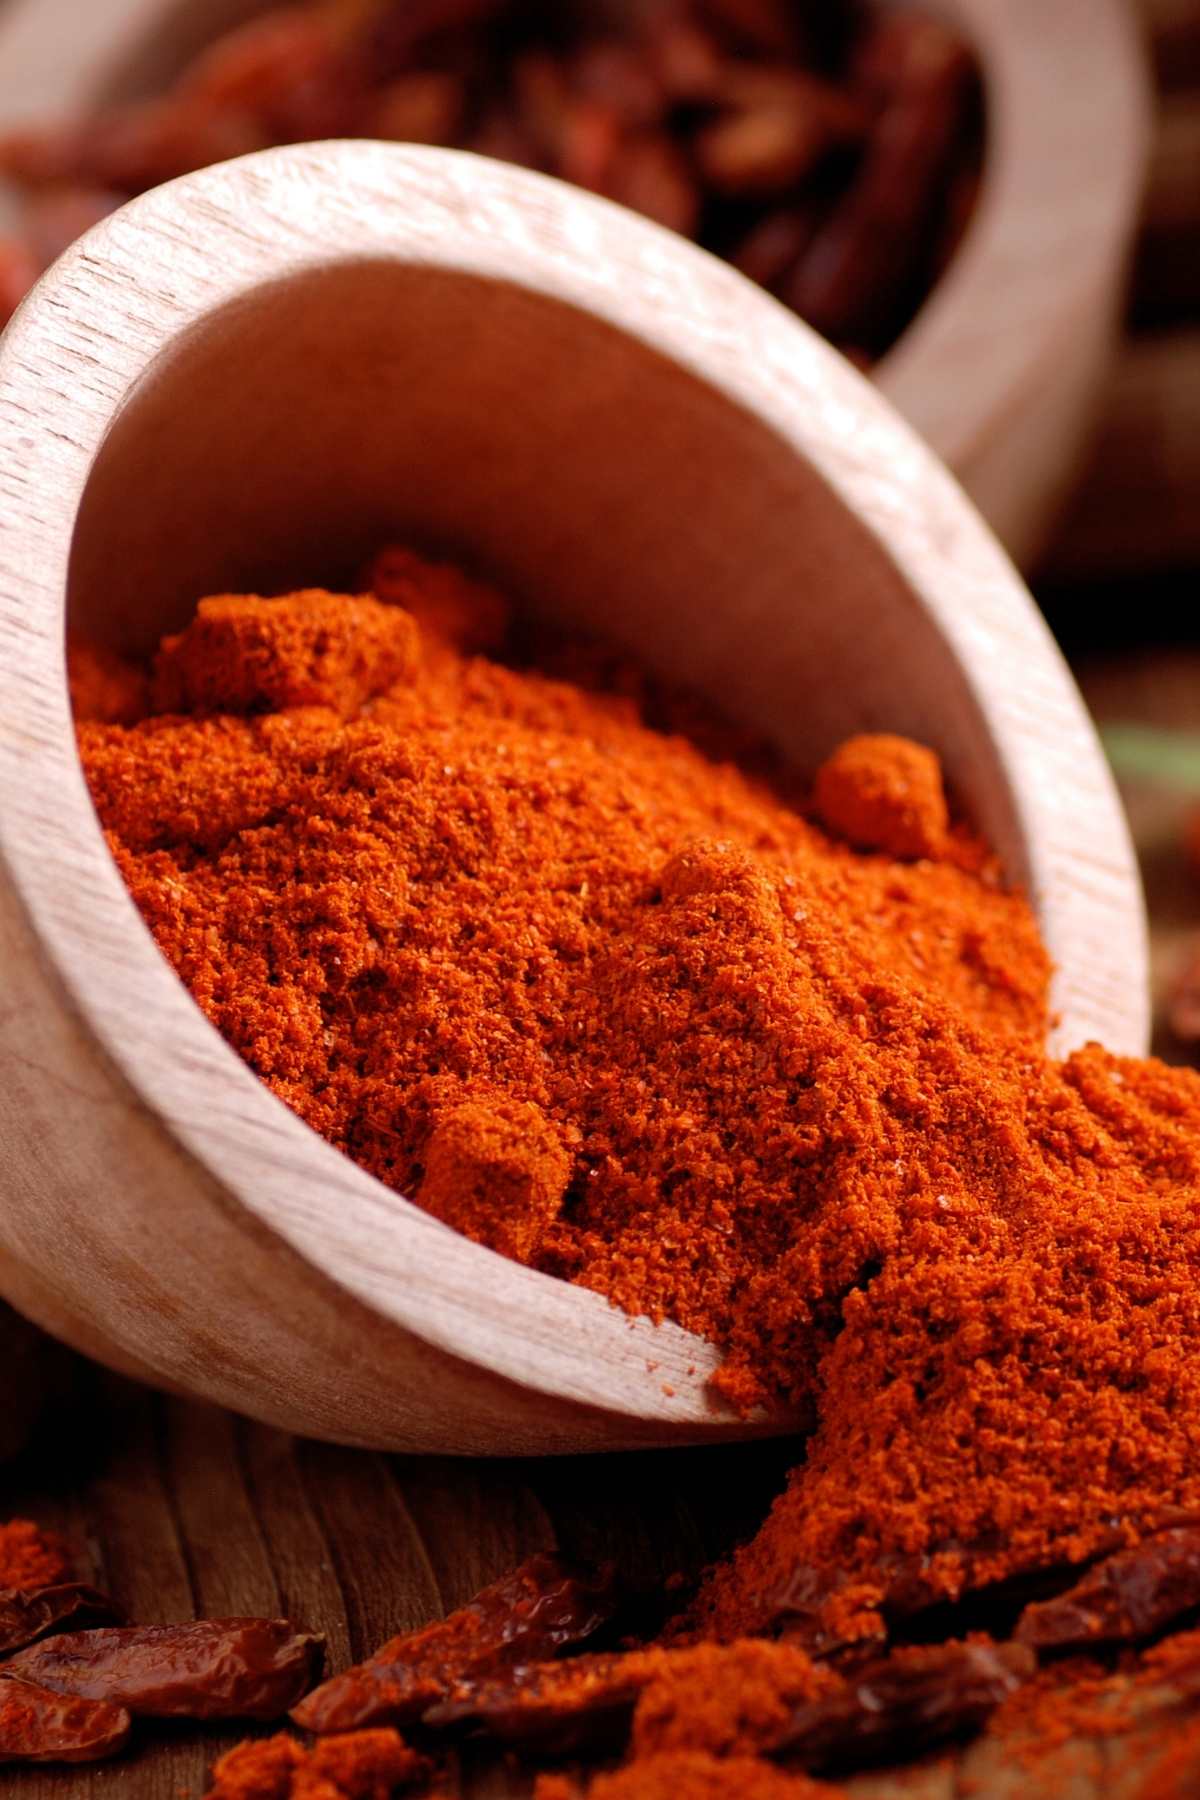 When your recipe calls for a bit of heat, there’s nothing like a sprinkling of chili powder to spice things up. But what can you do when you discover you’re all out of this bright red seasoning? We’ve collected 5 Best Chili Powder Substitutes that you can use before you run to the store to restock.